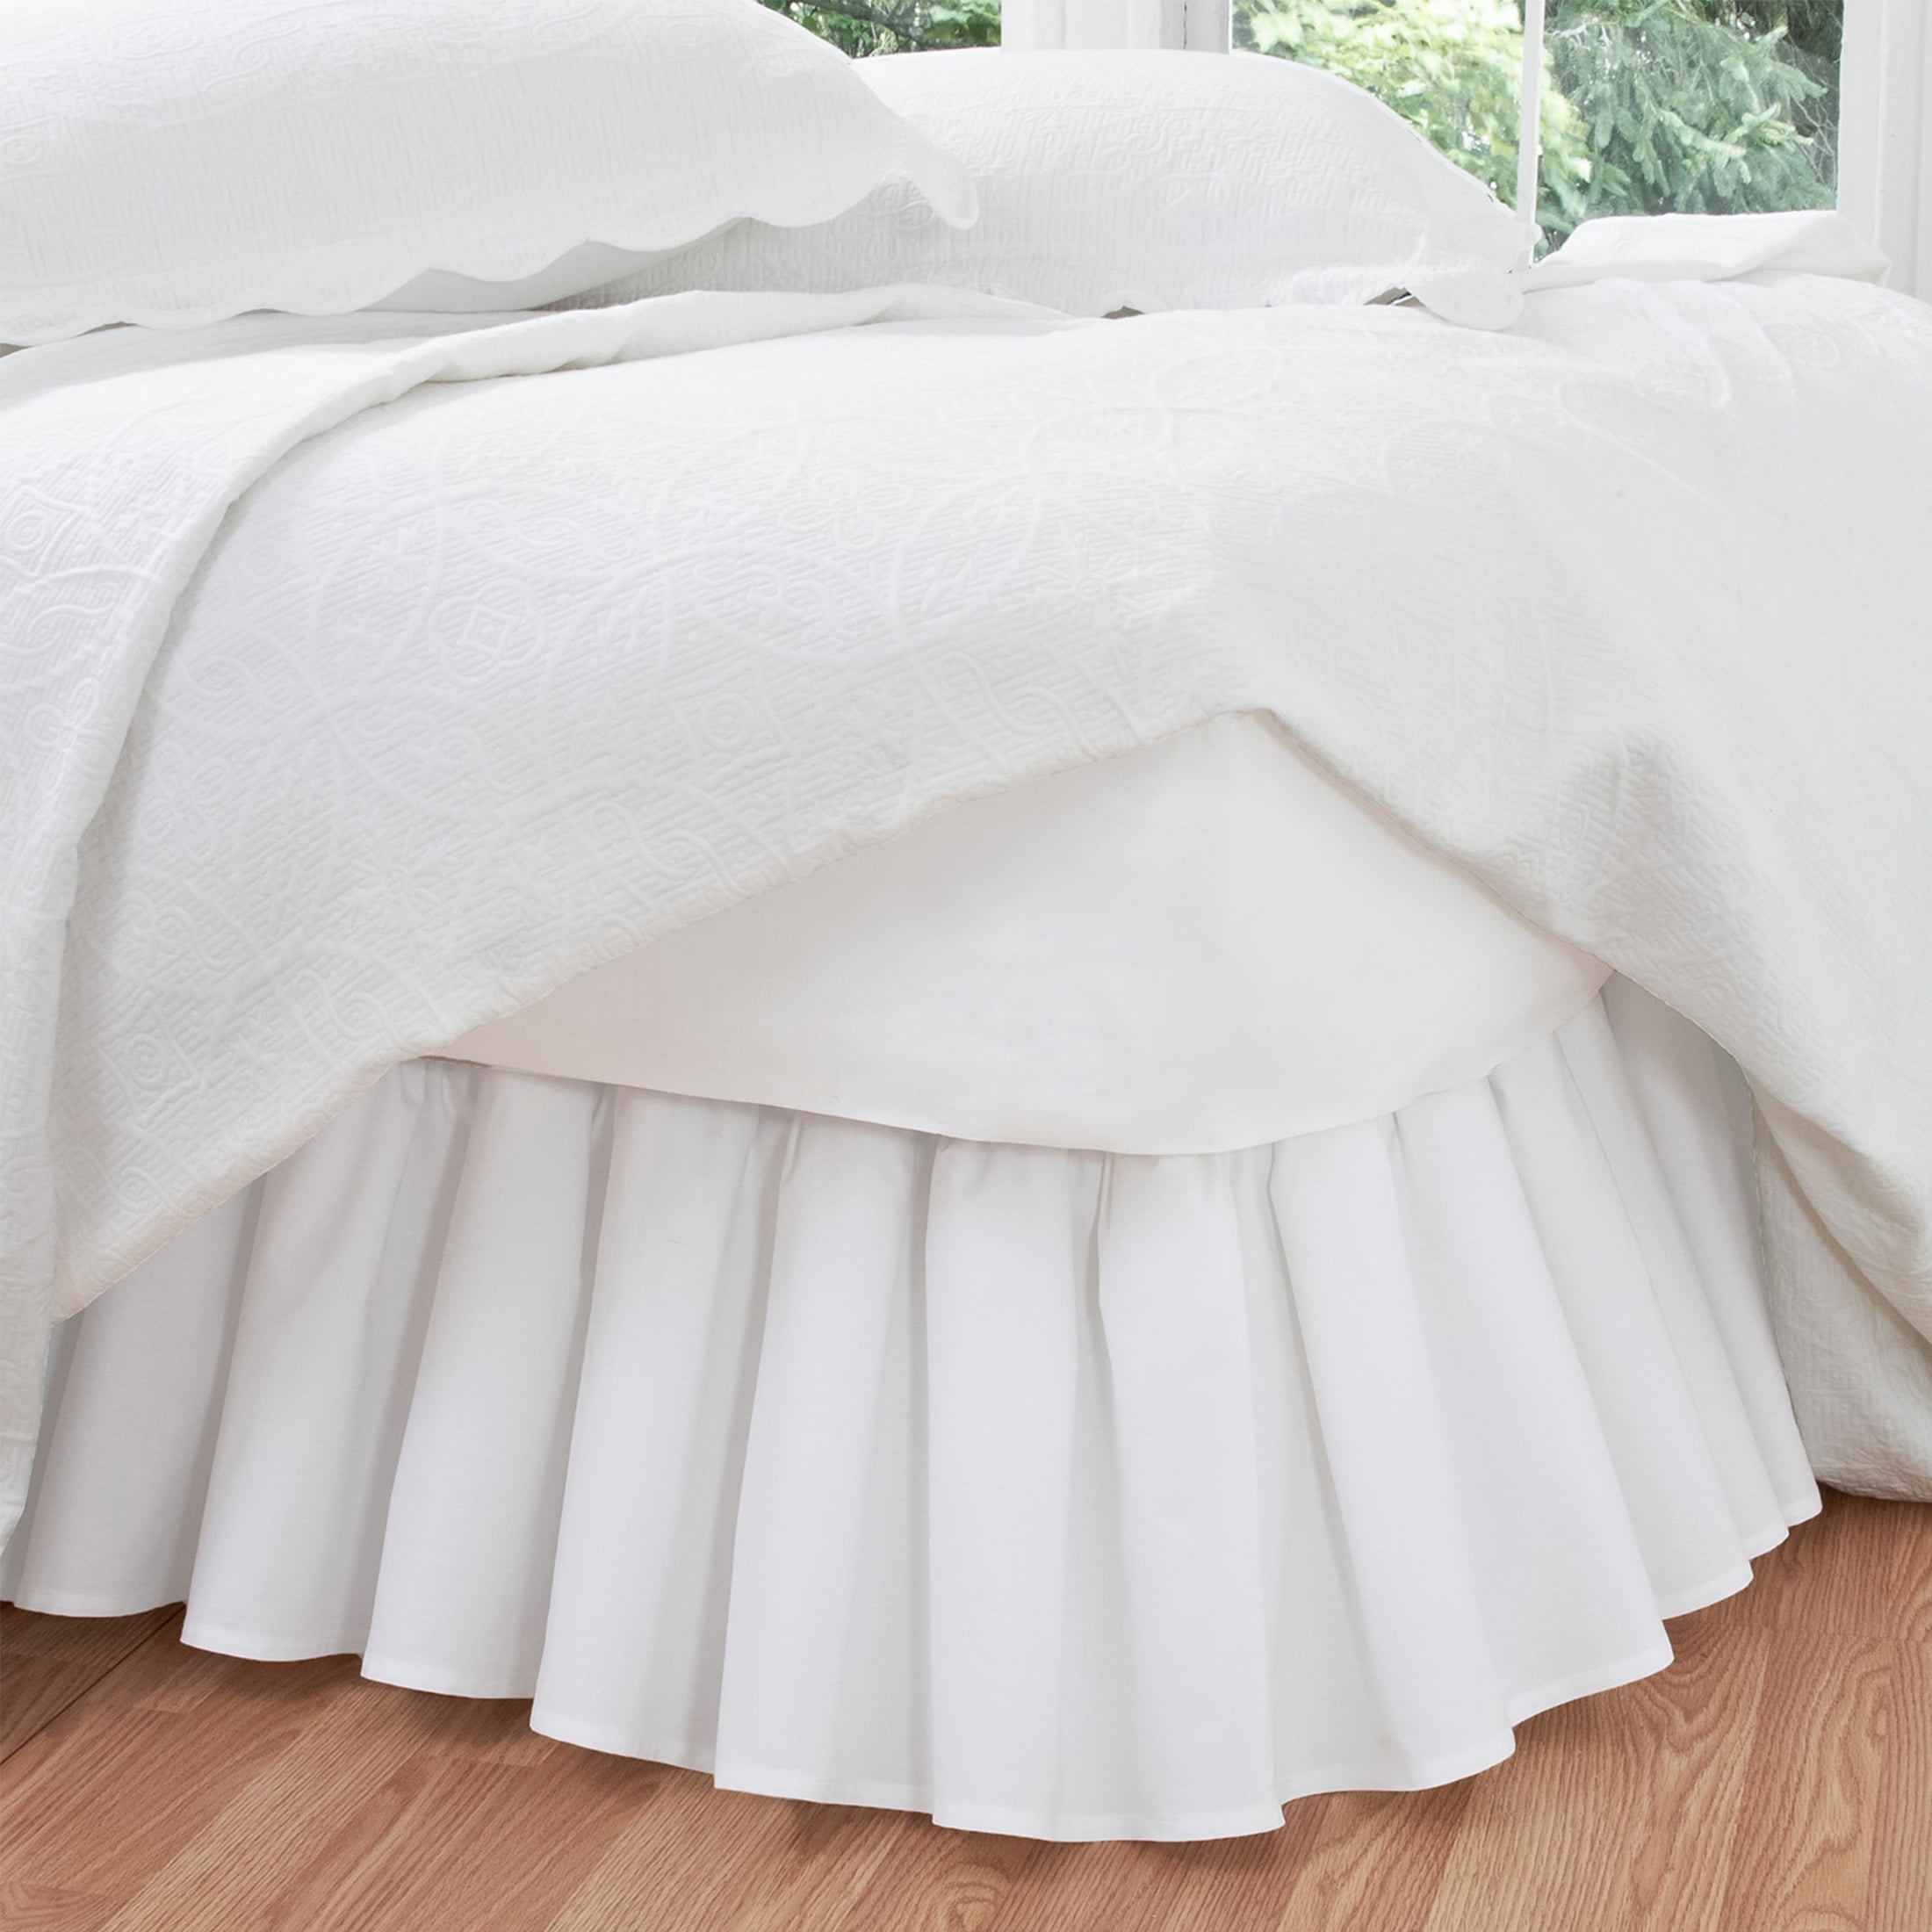 BEAUTIFUL WHITE OR IVORY RUFFLE VINTAGE ROMANTIC 14" BED SKIRT KING QUEEN FULL 